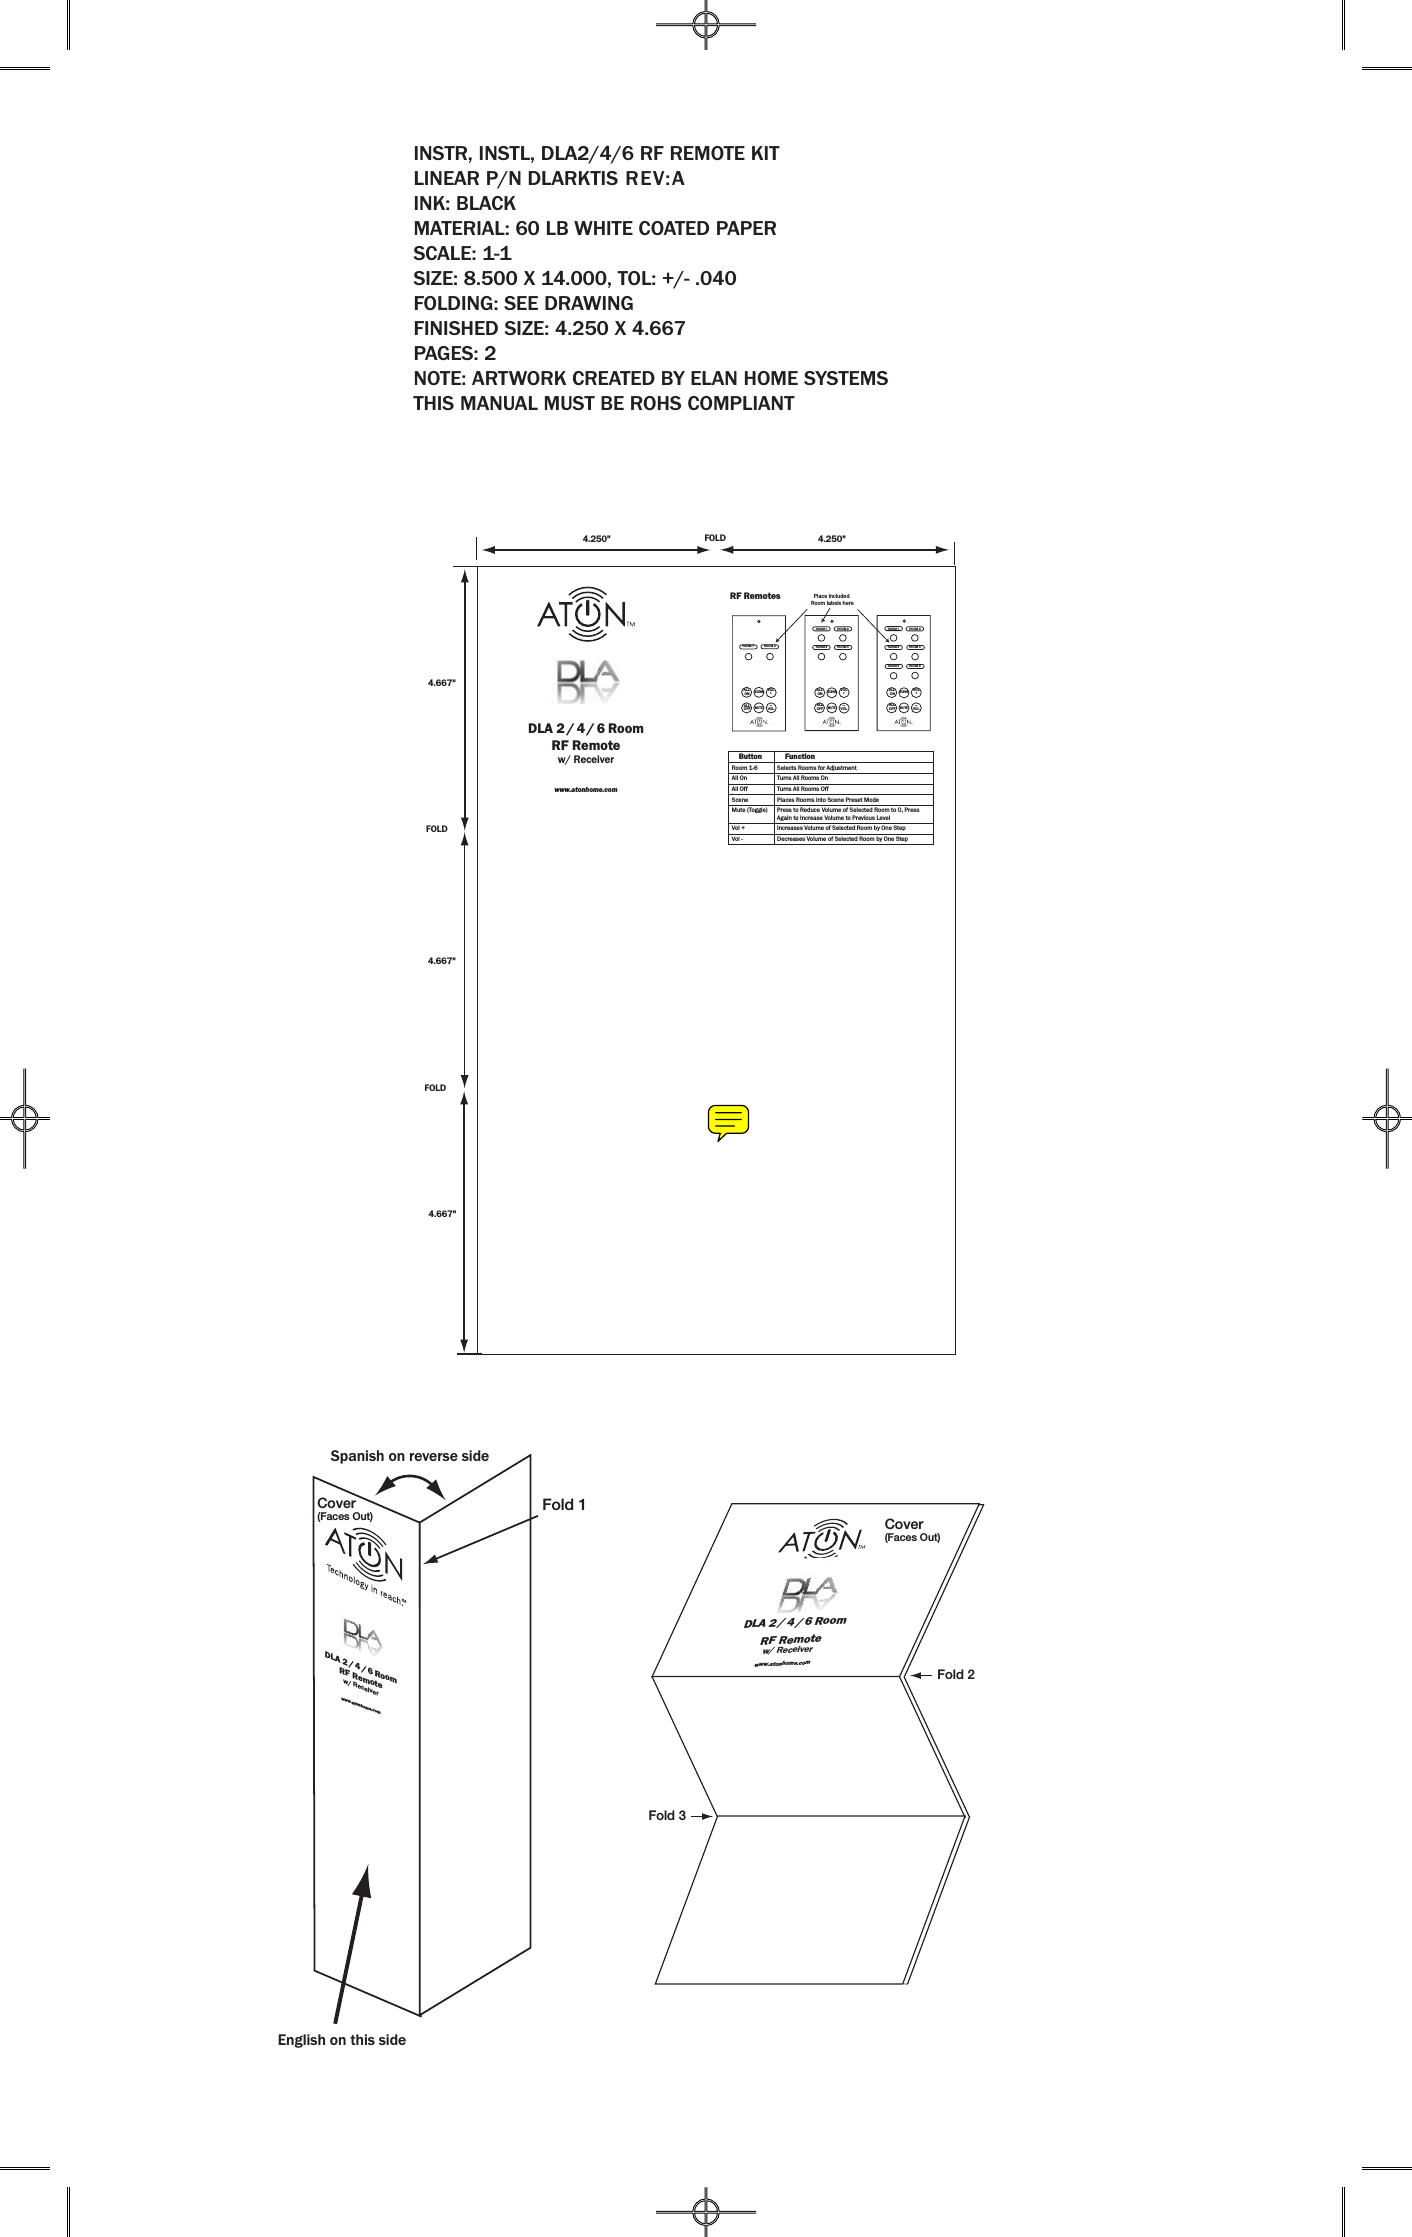 INSTR, INSTL, DLA2/4/6 RF REMOTE KITLINEAR P/N DLARKTIS REV:AINK: BLACKMATERIAL: 60 LB WHITE COATED PAPERSCALE: 1-1SIZE: 8.500 X 14.000, TOL: +/- .040FOLDING: SEE DRAWINGFINISHED SIZE: 4.250 X 4.667PAGES: 2NOTE: ARTWORK CREATED BY ELAN HOME SYSTEMSTHIS MANUAL MUST BE ROHS COMPLIANTROOM 1ROOM 1 ROOM 1ROOM 2ROOM 2 ROOM 2ROOM 3ROOM 3 ROOM 4 ROOM 4ROOM 5 ROOM 6ALL ONALL ONALL ONALLOFFALLOFFALLOFFSCENE SCENE SCENEMUTE MUTE MUTEVOL+VOL+VOL+VOL_VOL_VOL_Place included Room labels here    Button     FunctionRoom 1-6 Selects Rooms for AdjustmentAll On Turns All Rooms On  All Off Turns All Rooms Off  Scene Places Rooms into Scene Preset ModeMute (Toggle) Press to Reduce Volume of Selected Room to 0, Press Again to Increase Volume to Previous LevelVol + Increases Volume of Selected Room by One StepVol - Decreases Volume of Selected Room by One StepDLA 2 / 4 / 6 Room RF Remotew/ ReceiverRF Remoteswww.atonhome.com4.667&quot;4.667&quot;4.667&quot;FOLDFOLDFOLD4.250&quot; 4.250&quot;Cover(Faces Out)Fold 2Fold 3Fold 1English on this sideSpanish on reverse sideDLA 2 / 4 / 6 Room RF Remotew/ Receiverwww.atonhome.comDLA 2 / 4 / 6 Room RF Remotew/ Receiverwww.atonhome.comCover(Faces Out)